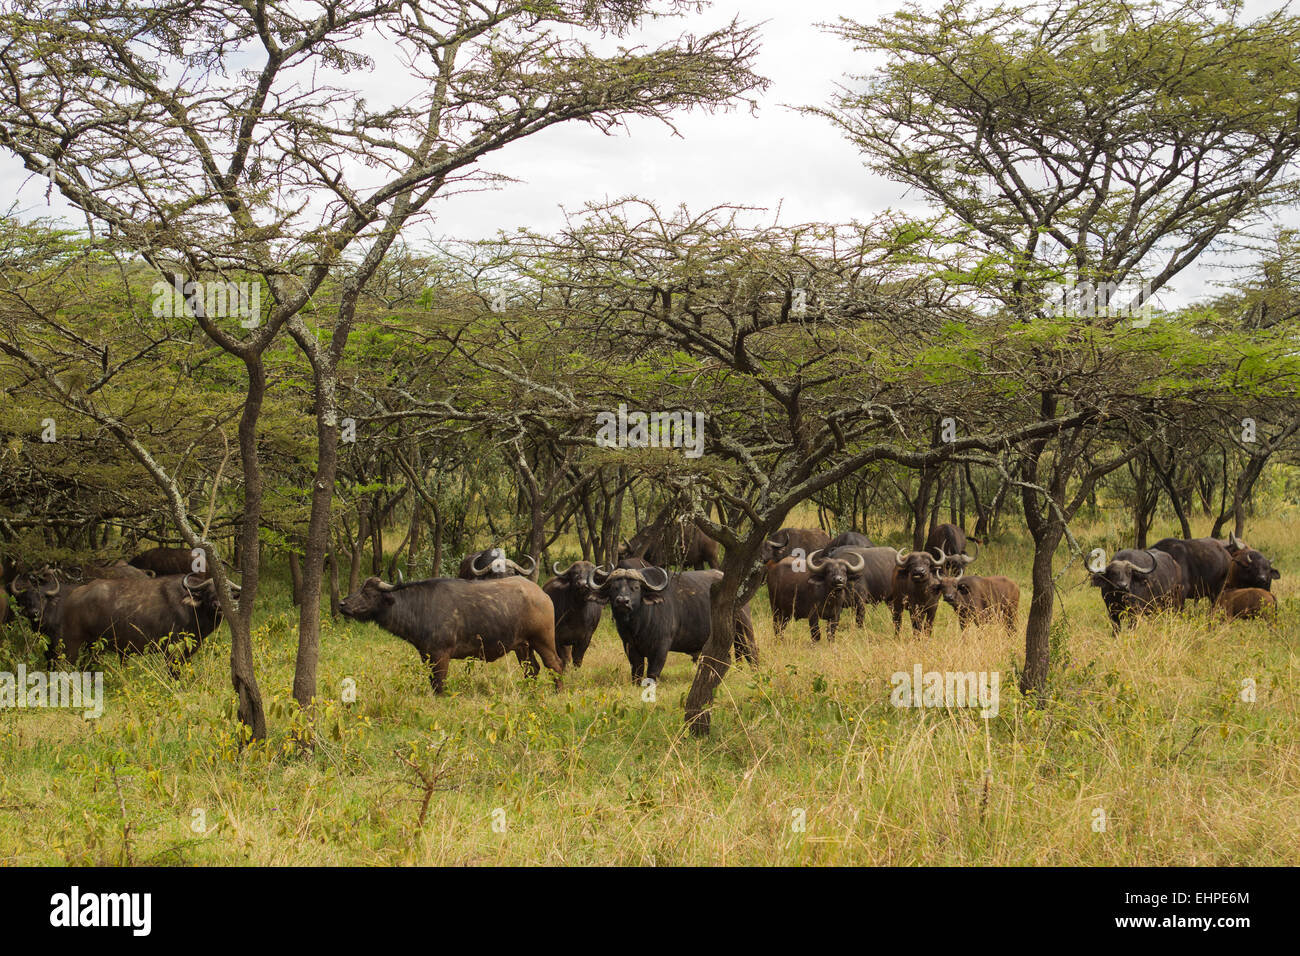 African or Cape, Buffalo (Syncerus caffer) herd in acacia trees Stock Photo